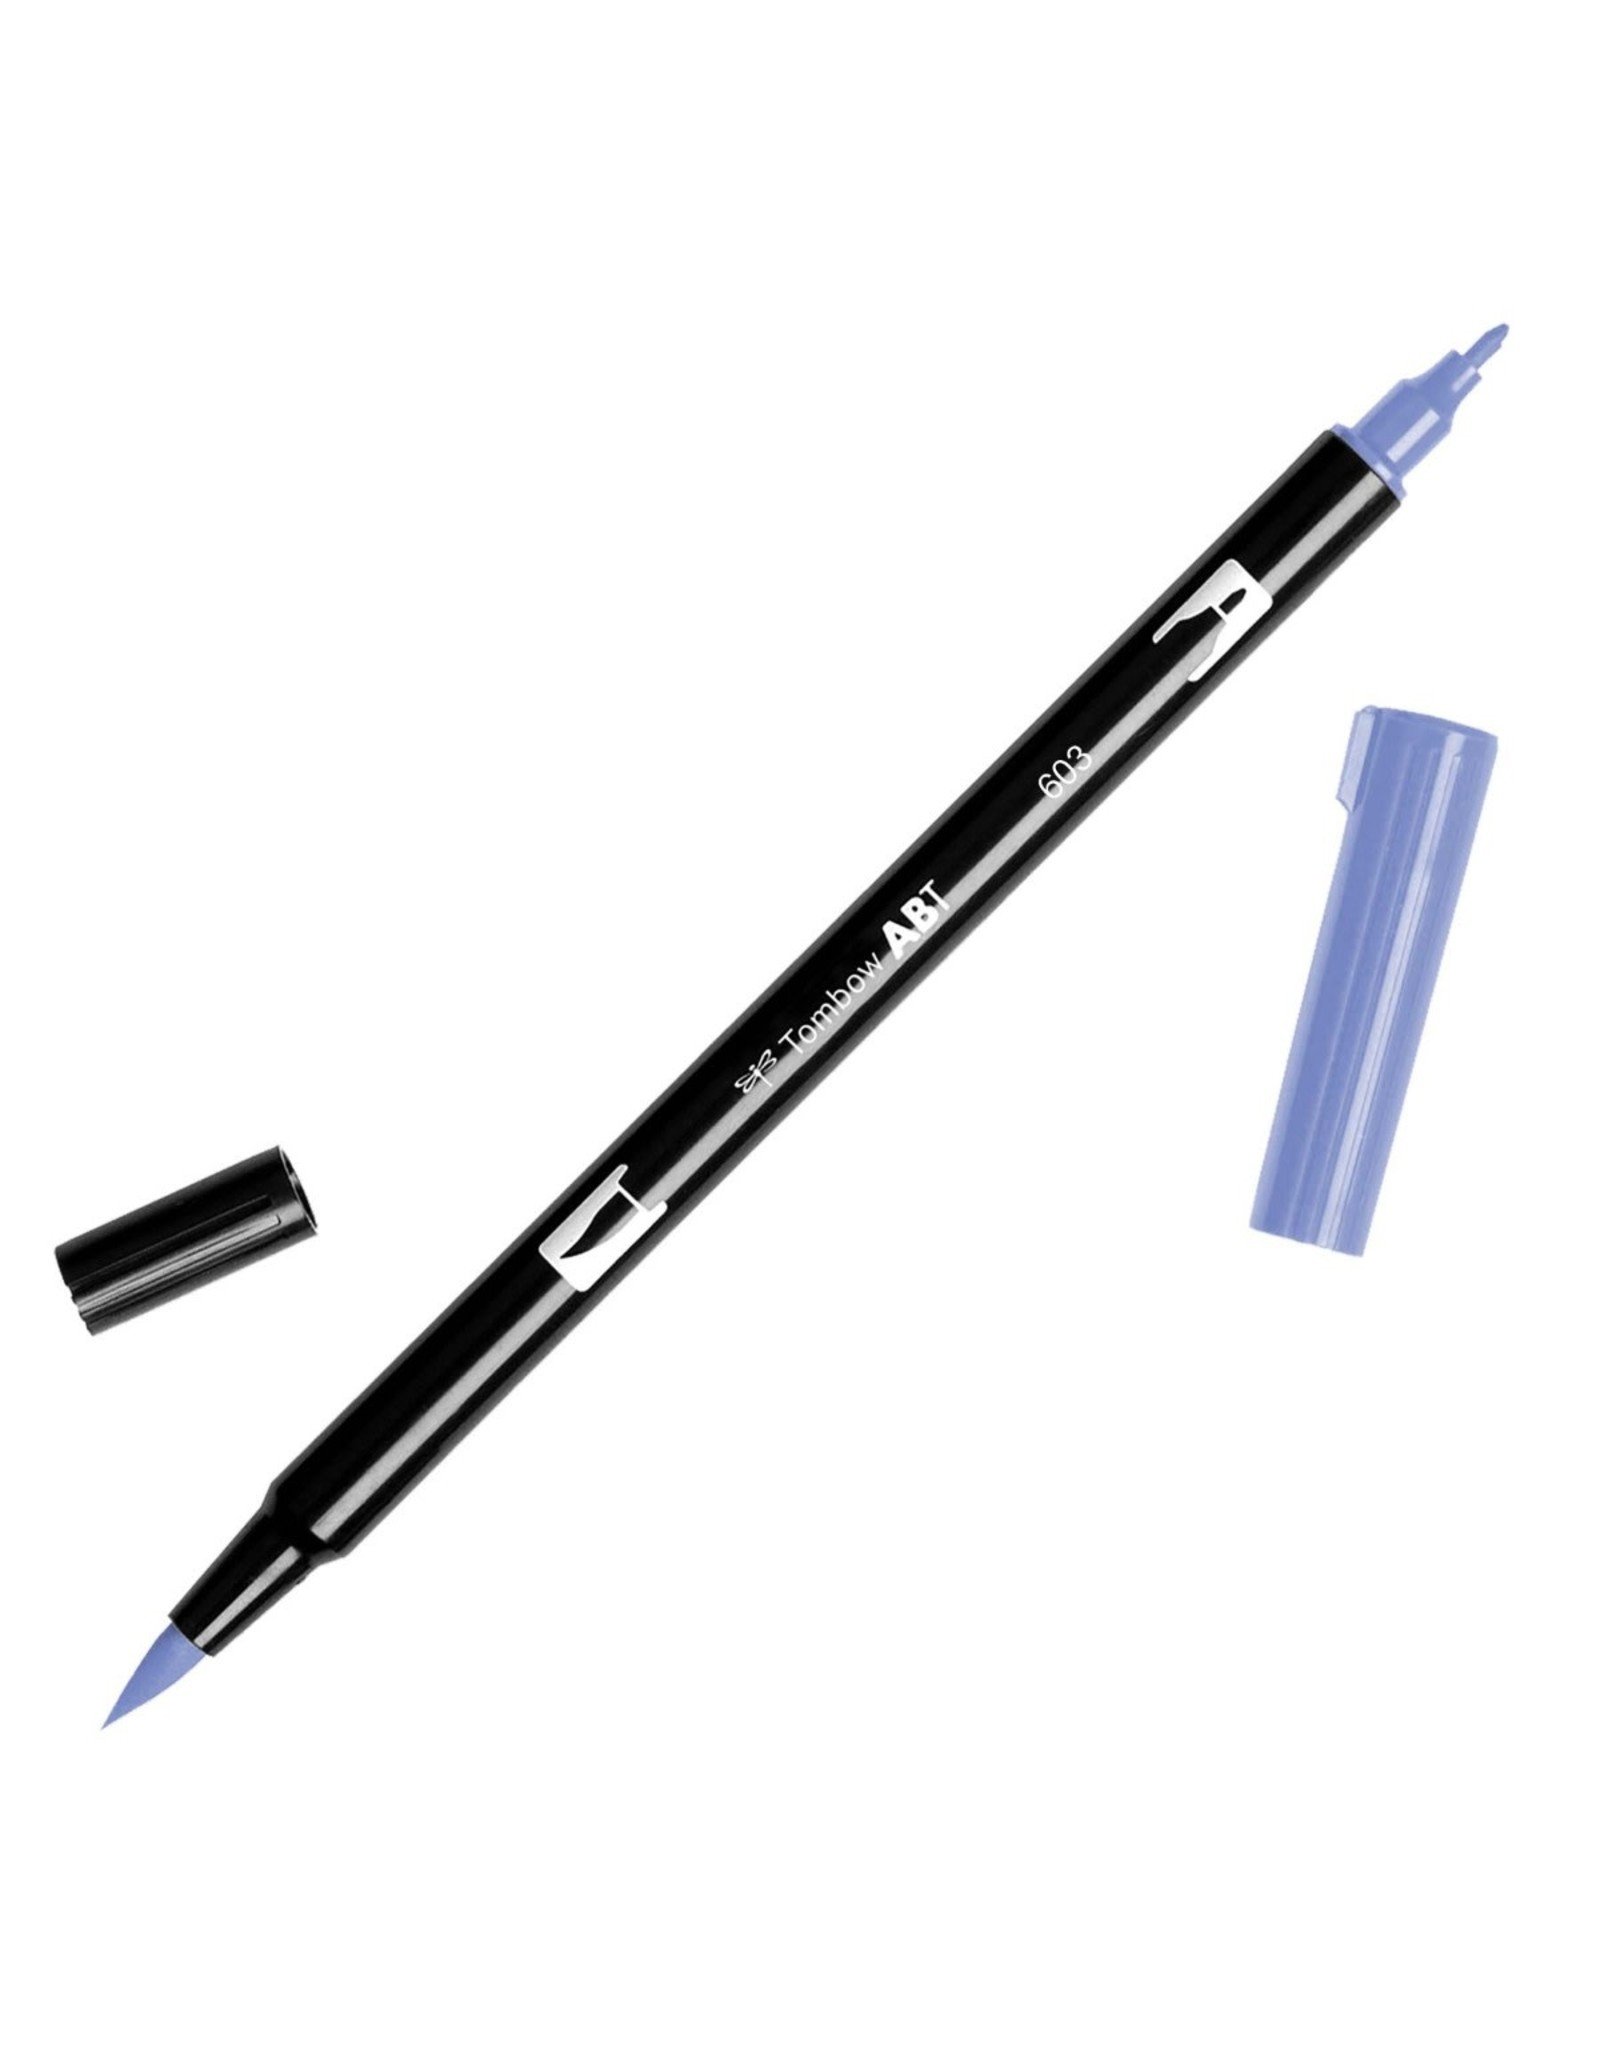 TOMBOW TOMBOW ABT-603 PERIWINKLE DUAL BRUSH MARKER